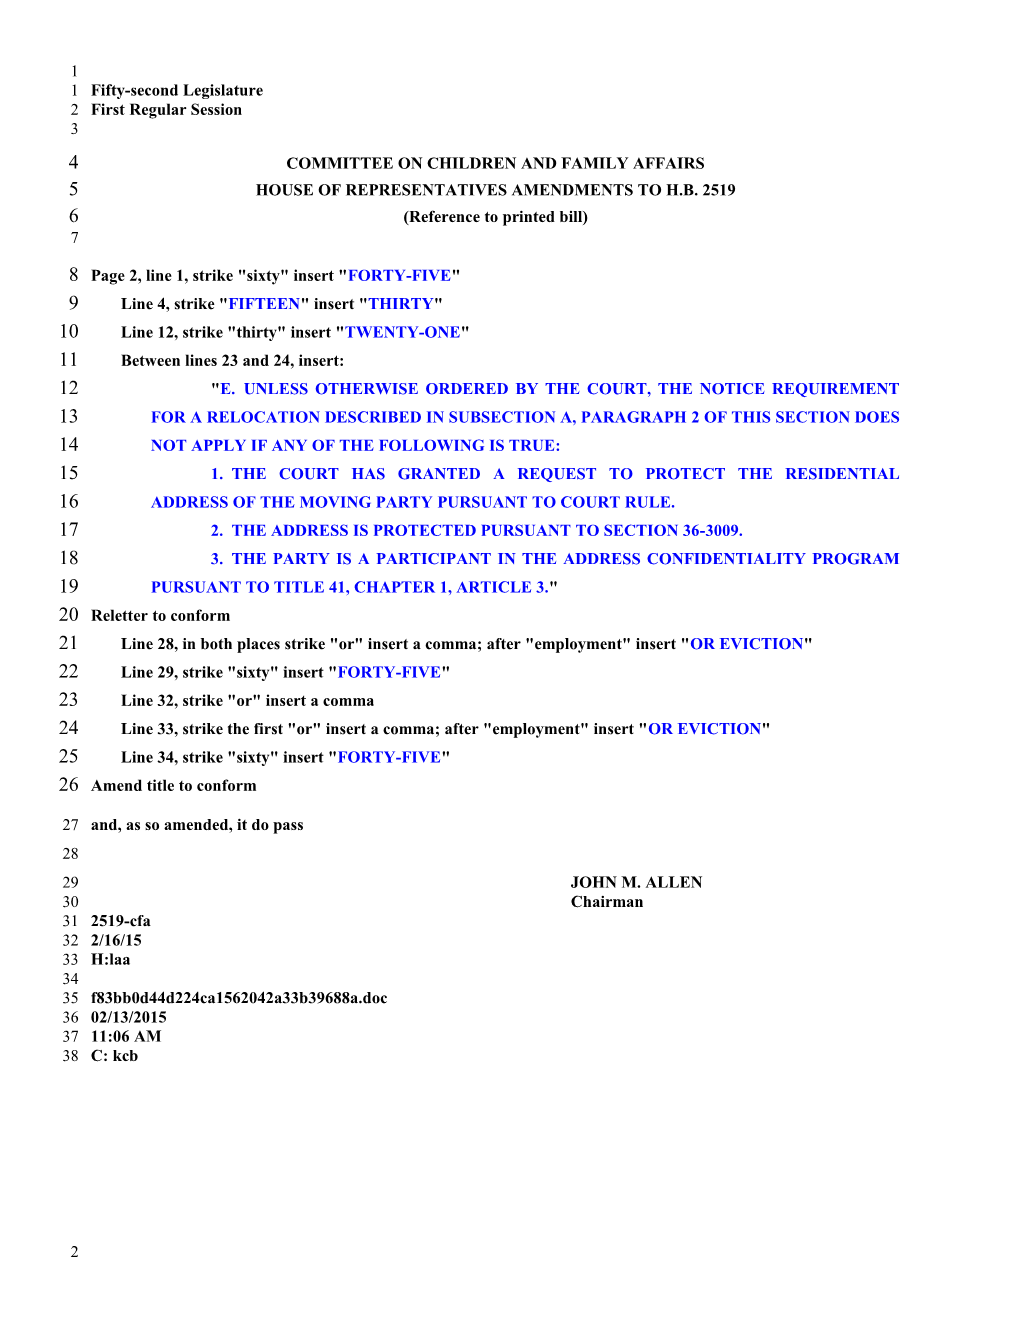 House Committee Amendment s1